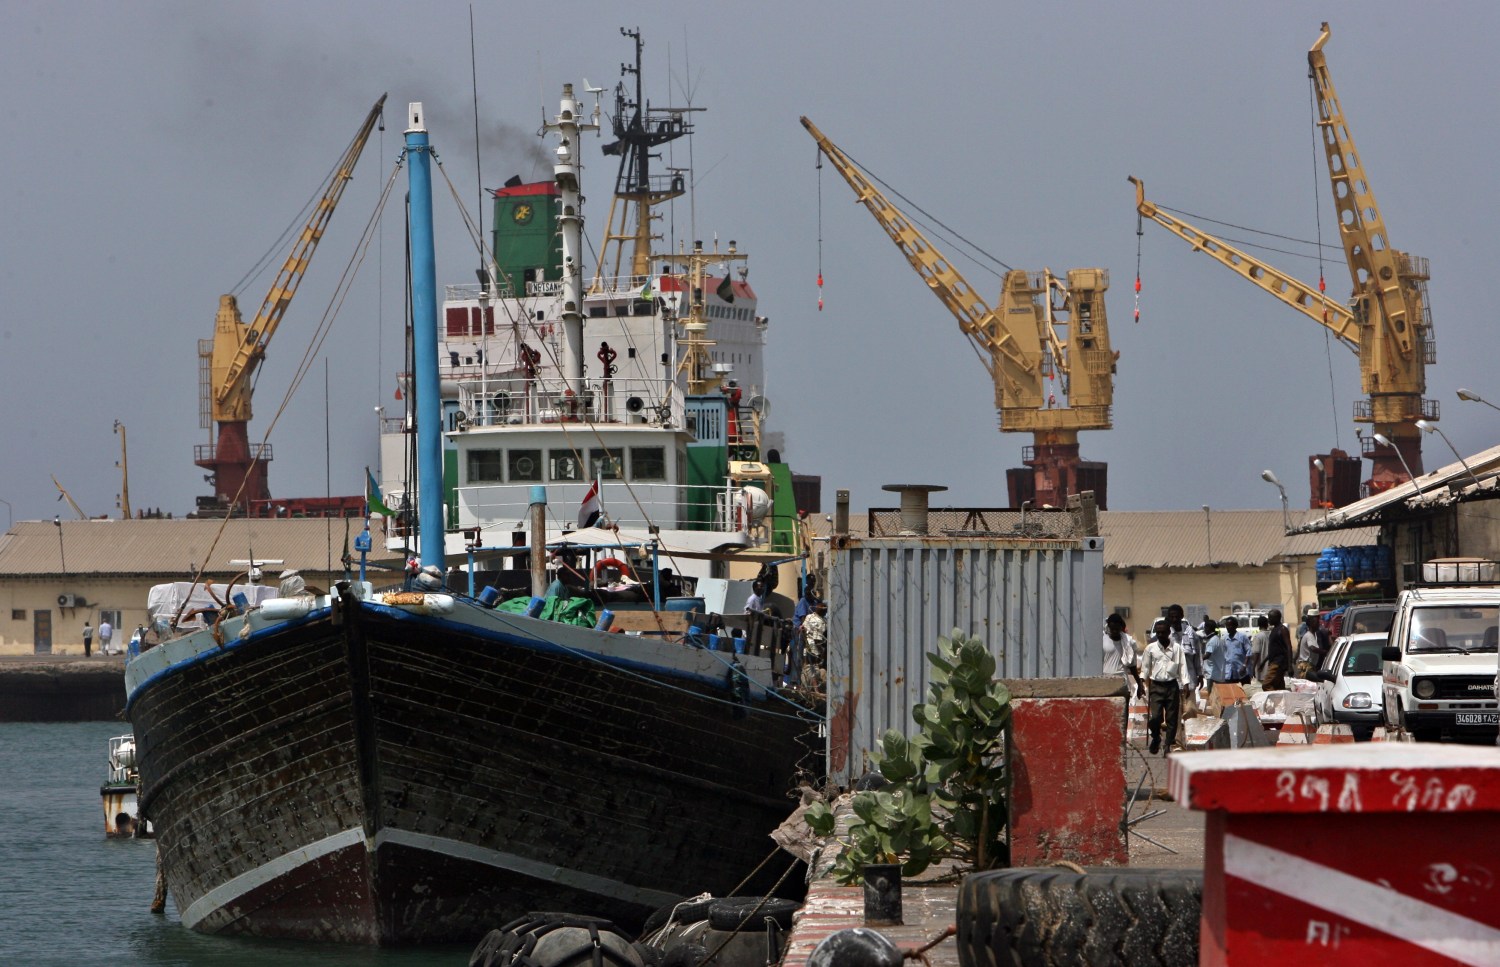 A general view shows the Djibouti port which is owned by DP World February 26, 2006. The Bush administration has come under fire for approving the sale of the nation's port operations to a state-owned Dubai company. REUTERS/Ahmed Jadallah - GM1DSAUKGMAA